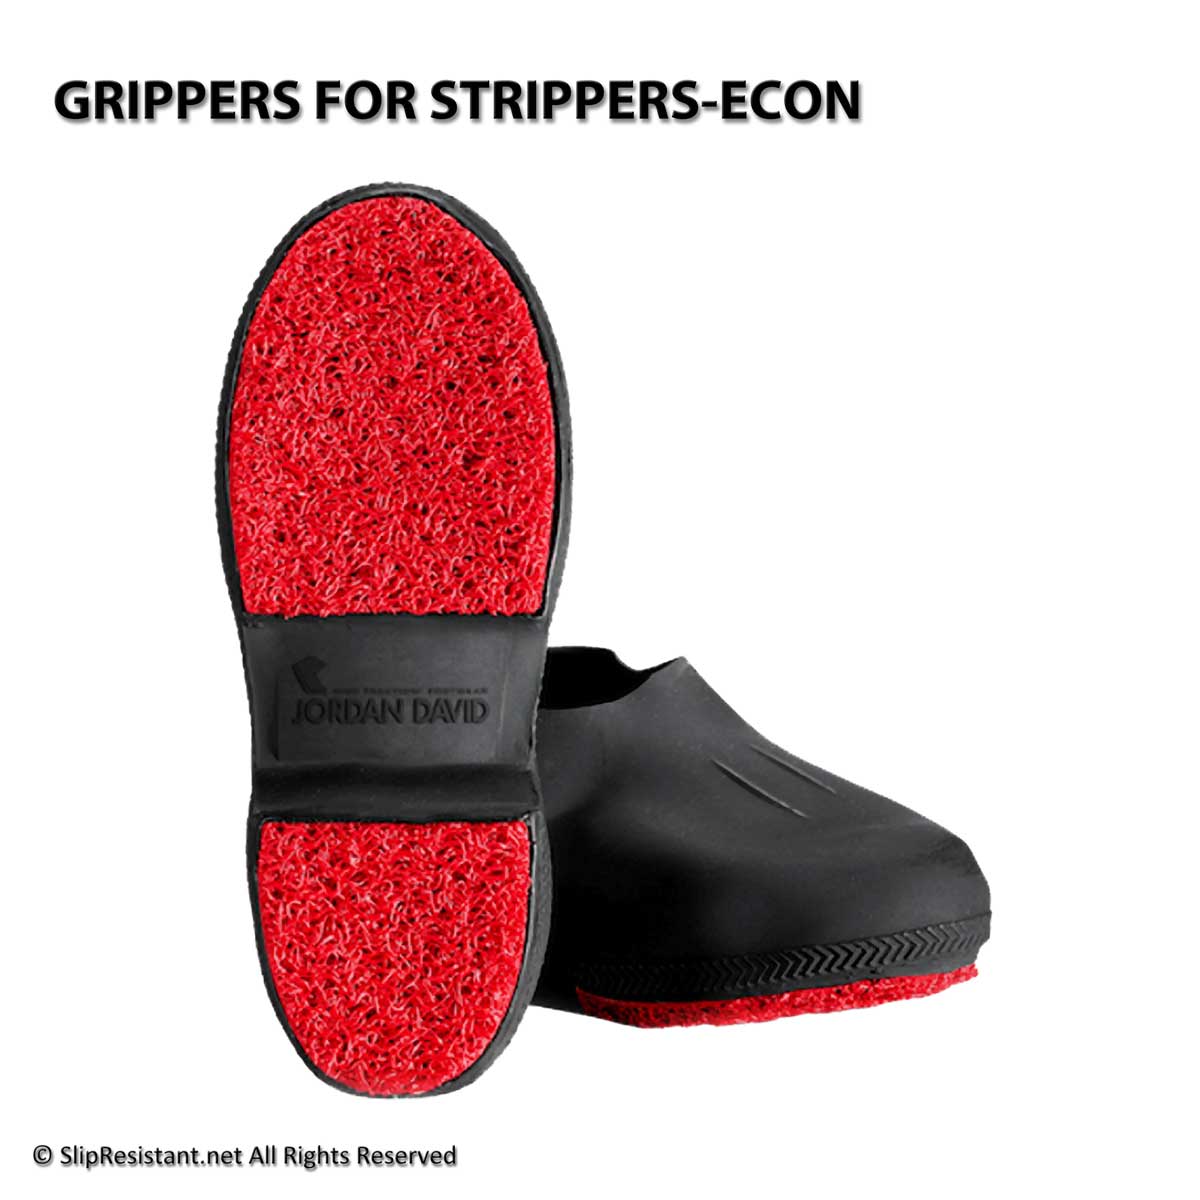 GRIPPERS FOR STRIPPERS ECON JD2226 made with latex.